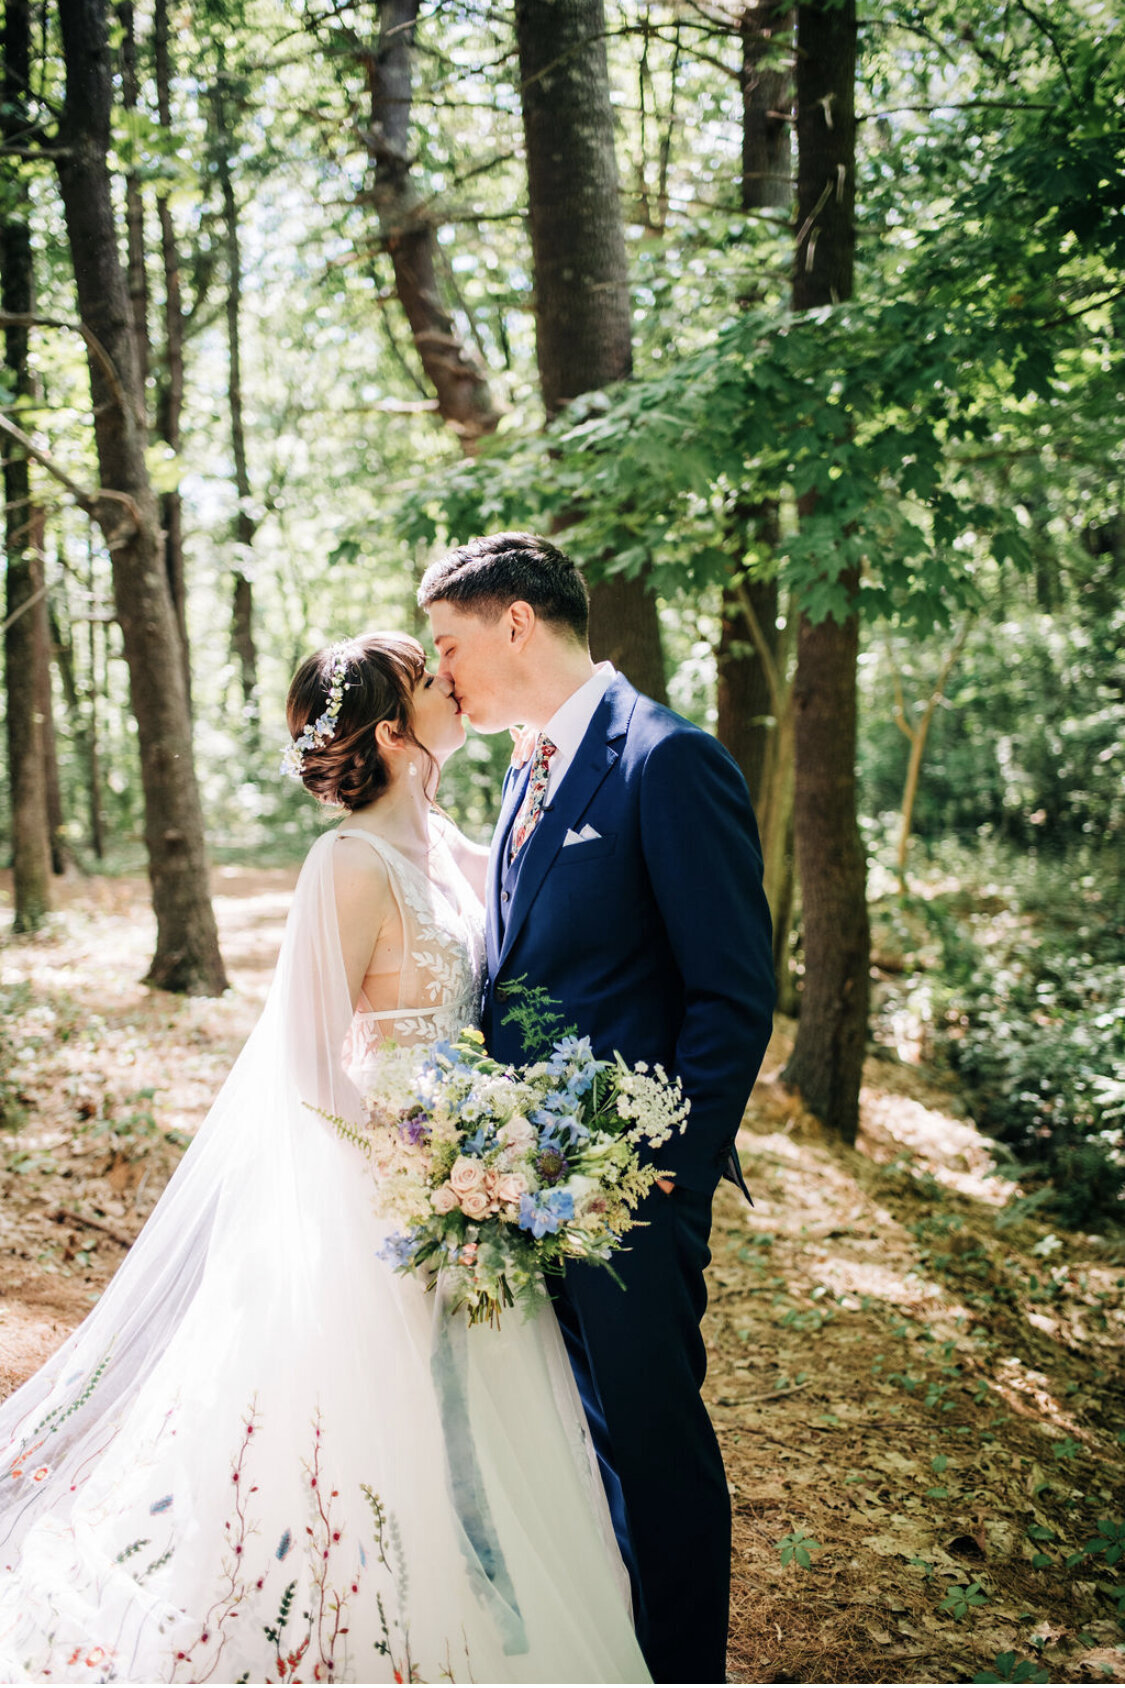 Woodsy wedding bouquet by Boston Florist Prose Florals captured by Alexandra Roberts